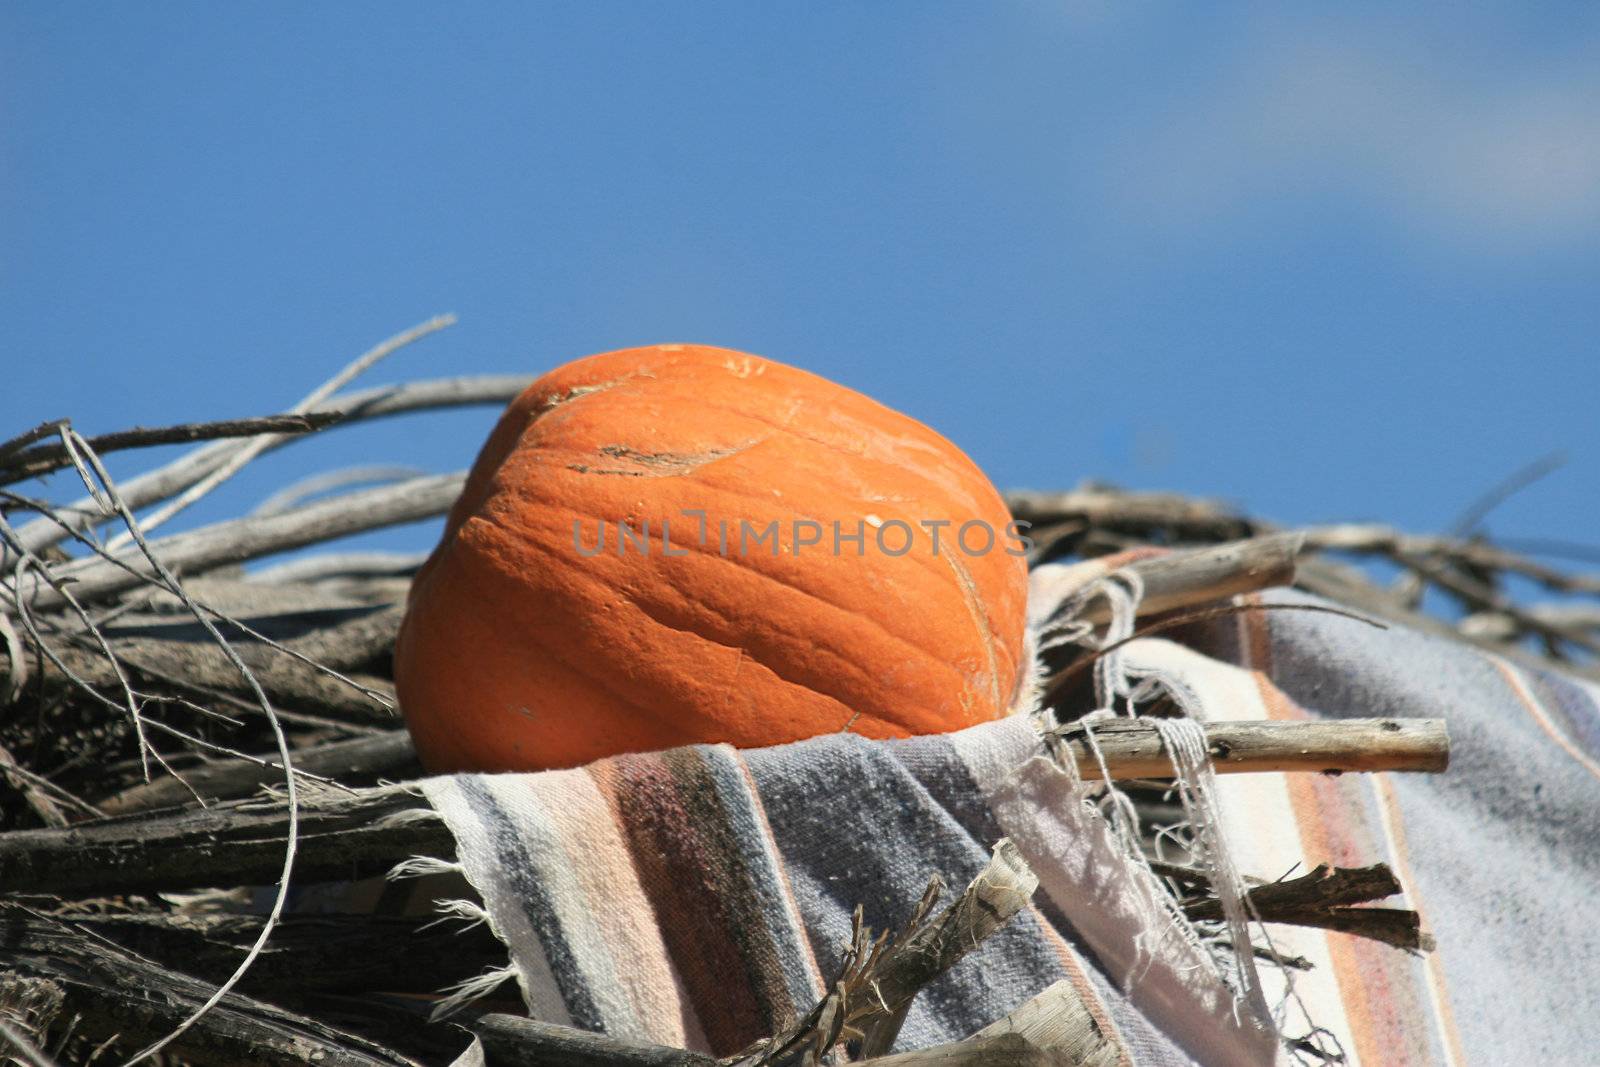 Pumpkin (Cucurbita moschata) curing on a thatched roof of a 400 year old working ranch in preparation for storage